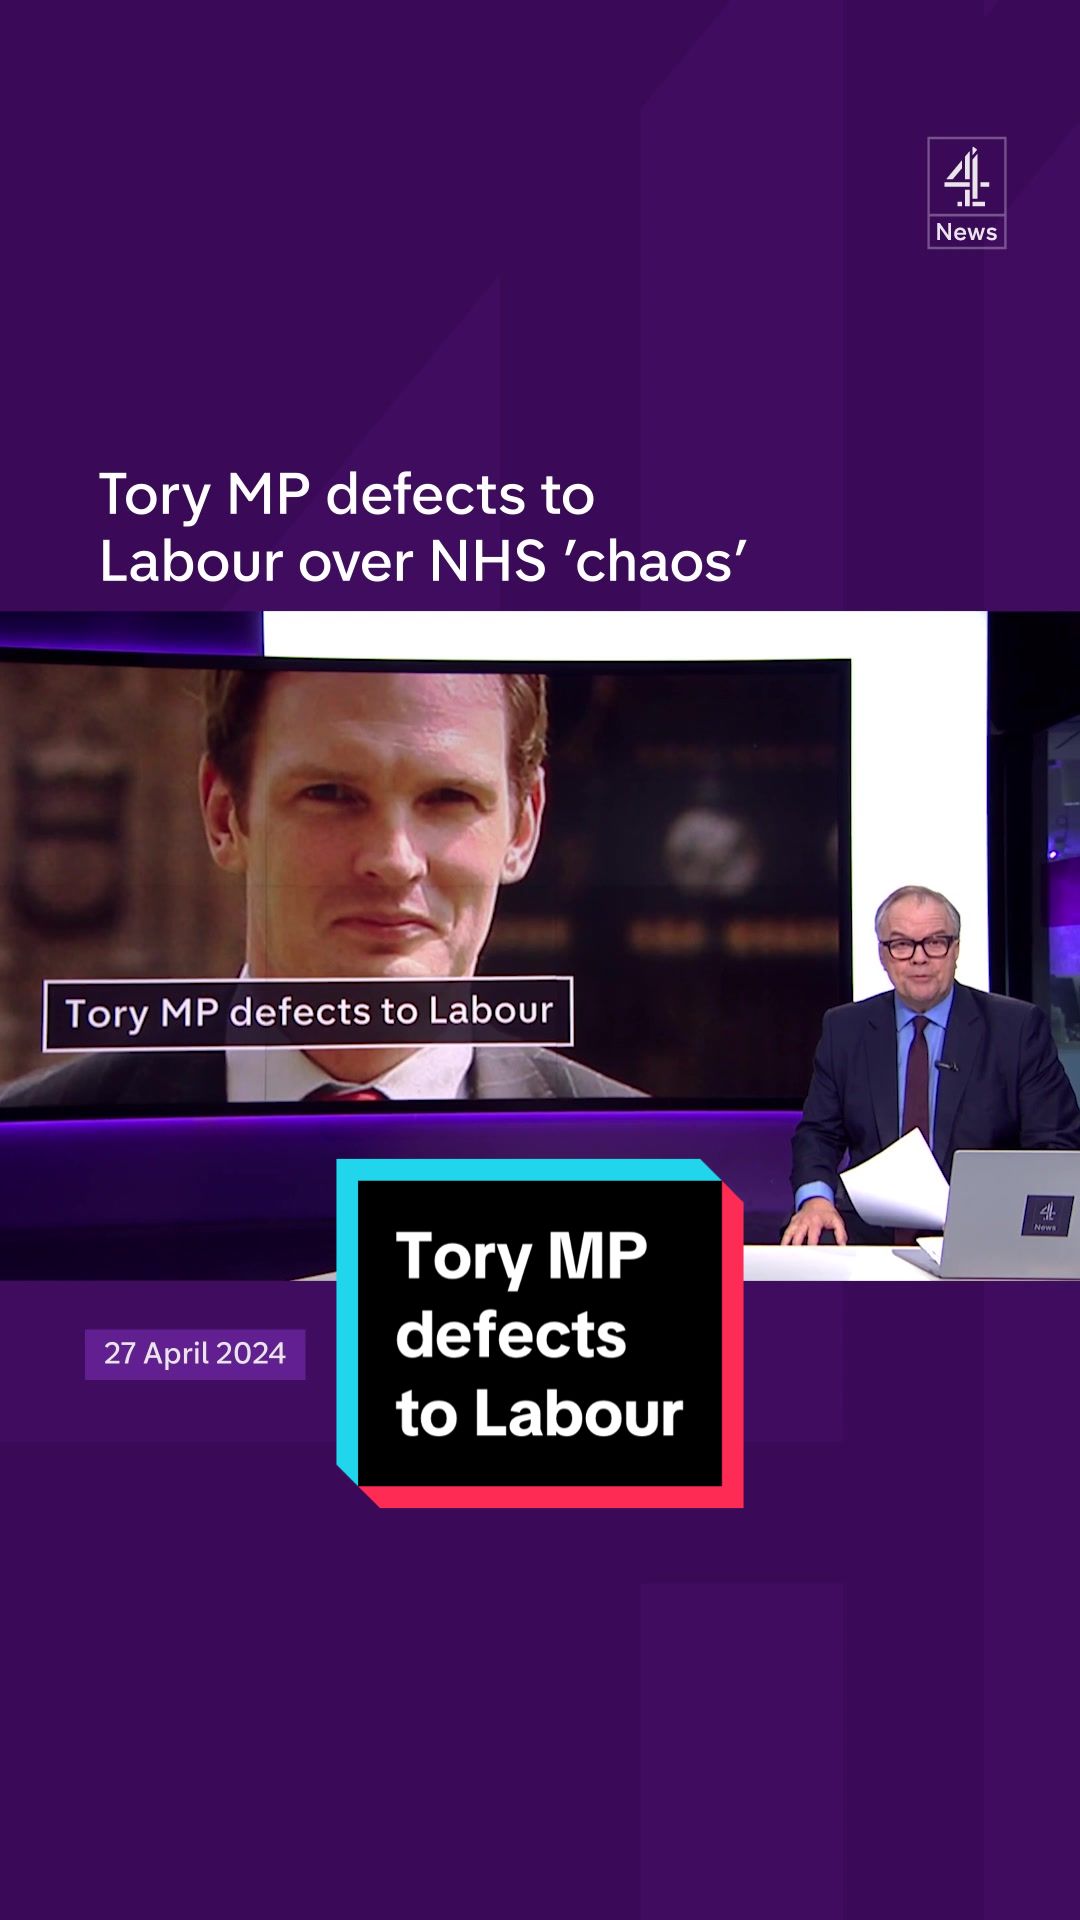 Tory MP and former health minister Dan Poulter has defected to Labour - citing "chaos" in the NHS as his reason #tories #ukpolitics #politics #labour #commons